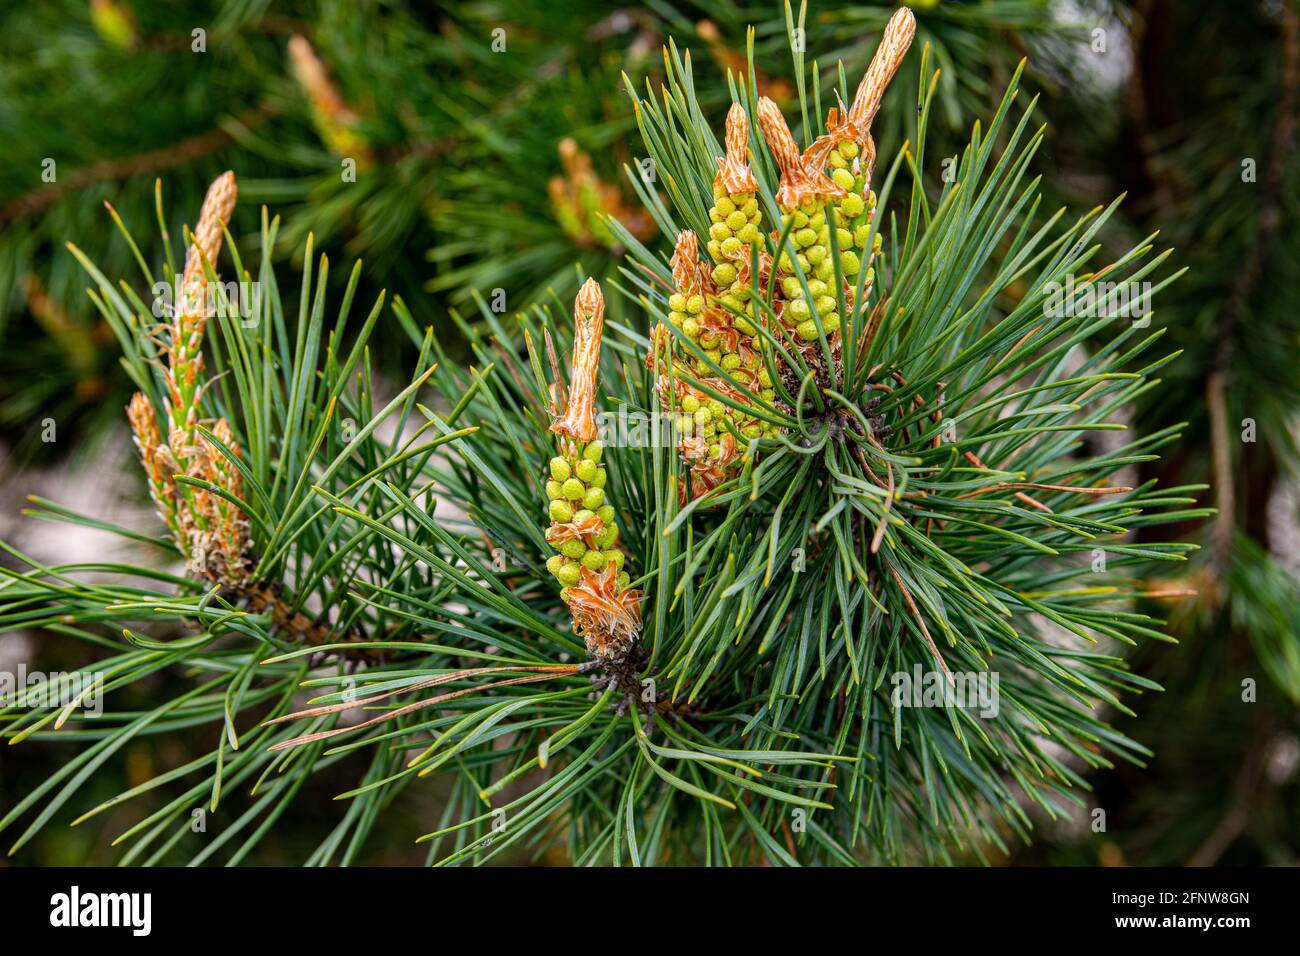 Young shoots and pine cones, green needles. Spring day. Close-up image. Stock Photo